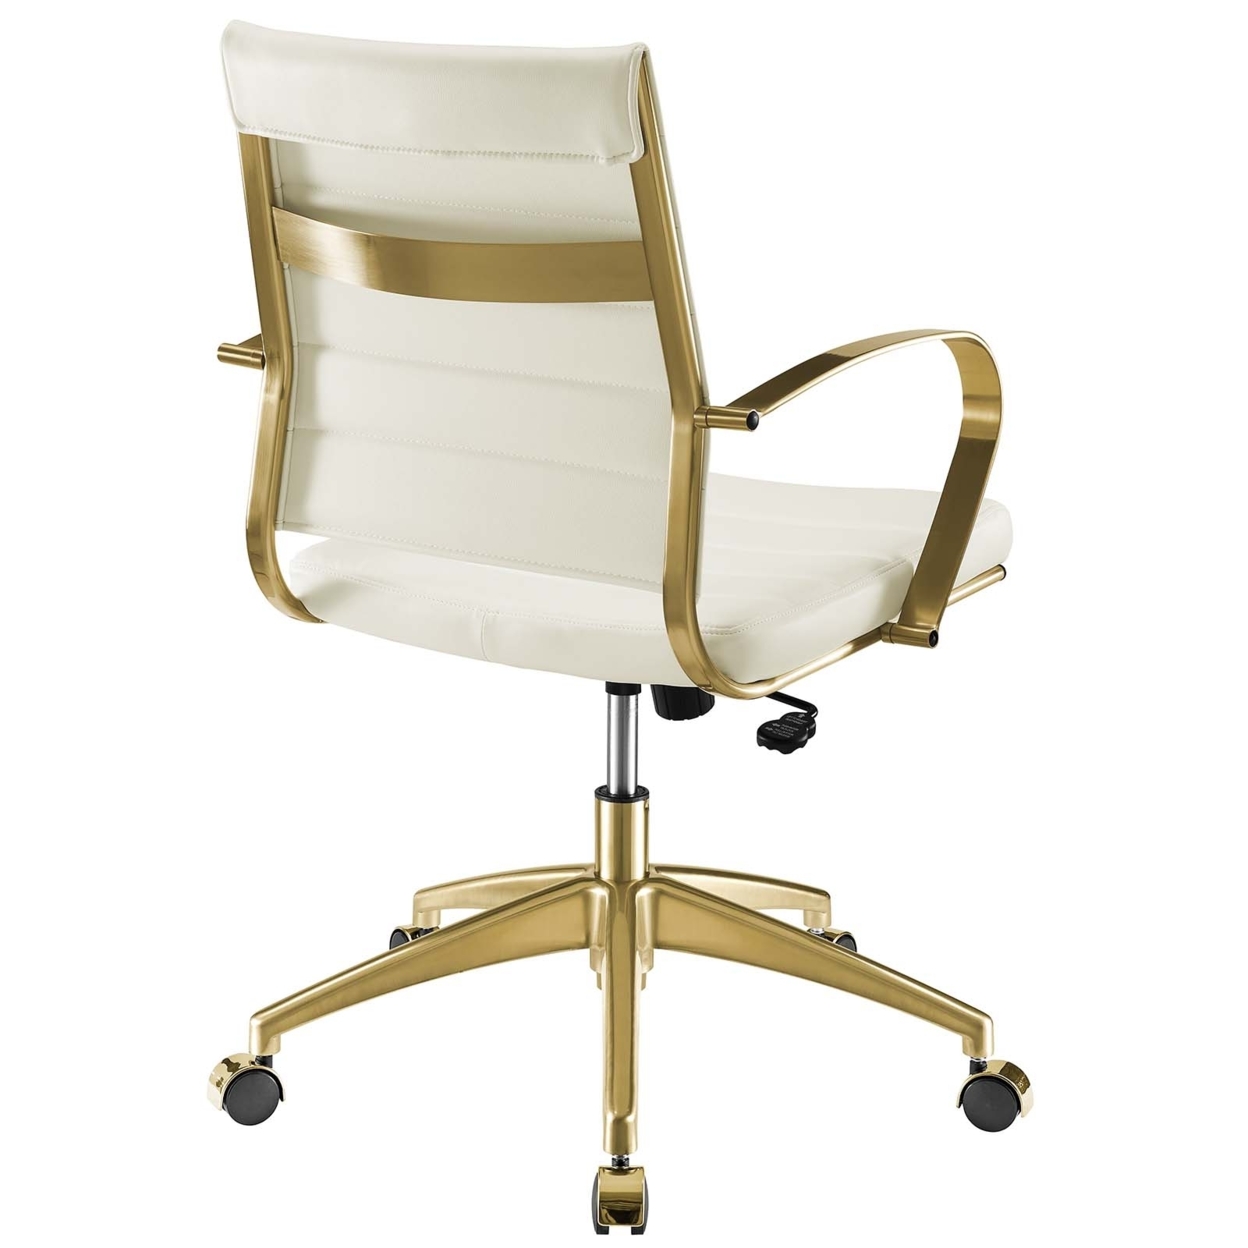 Jive Gold Stainless Steel Midback Office Chair,Gold White